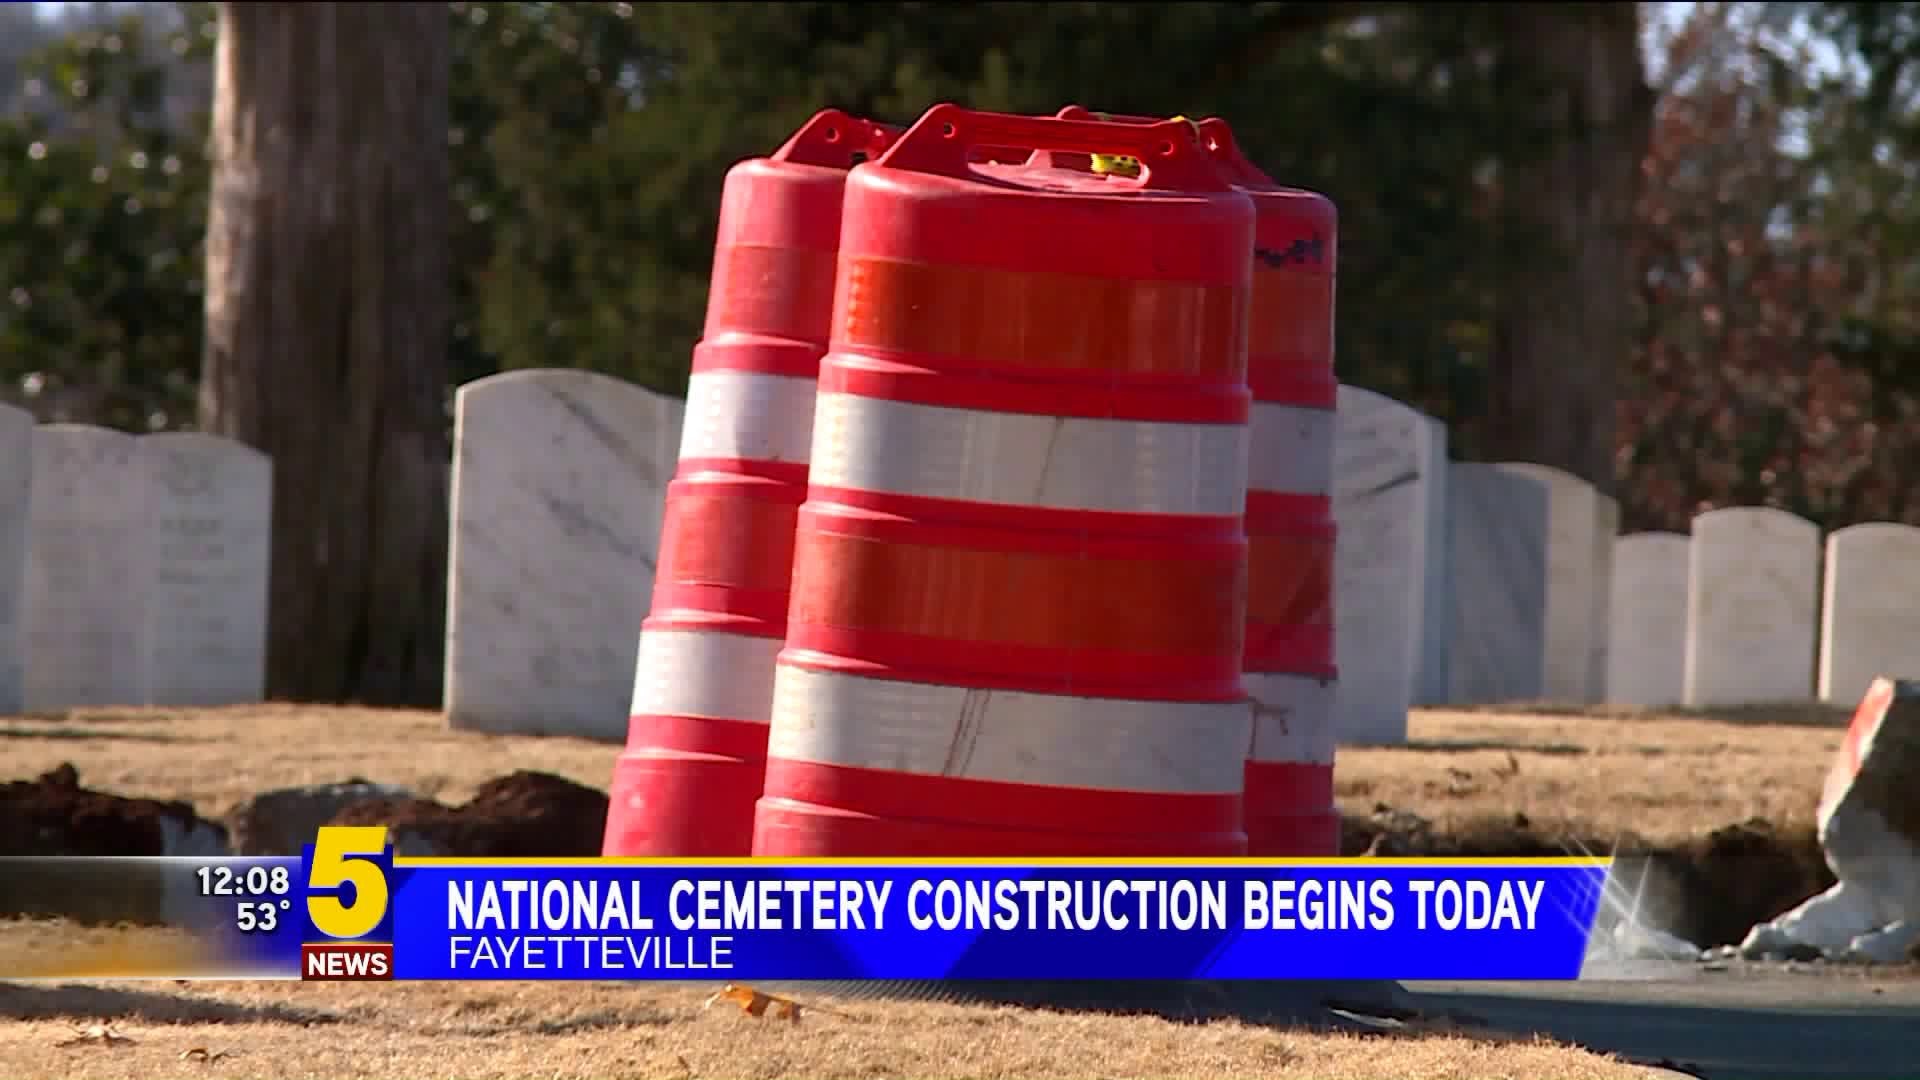 Fayetteville National Cemetery Construction